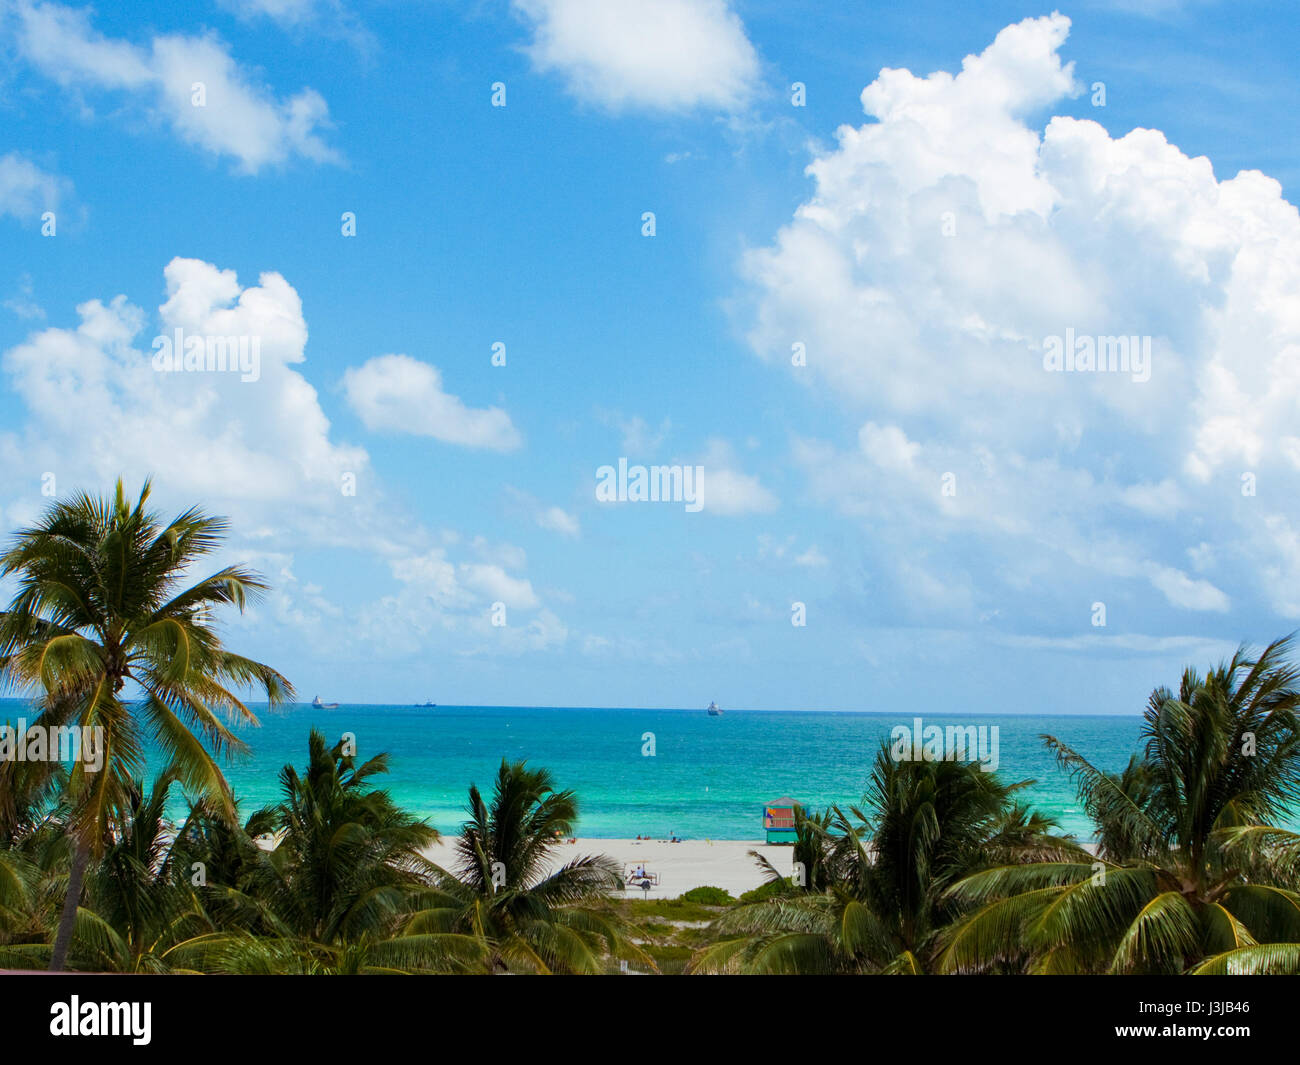 Palm trees on sandy beach with blue skies. Stock Photo